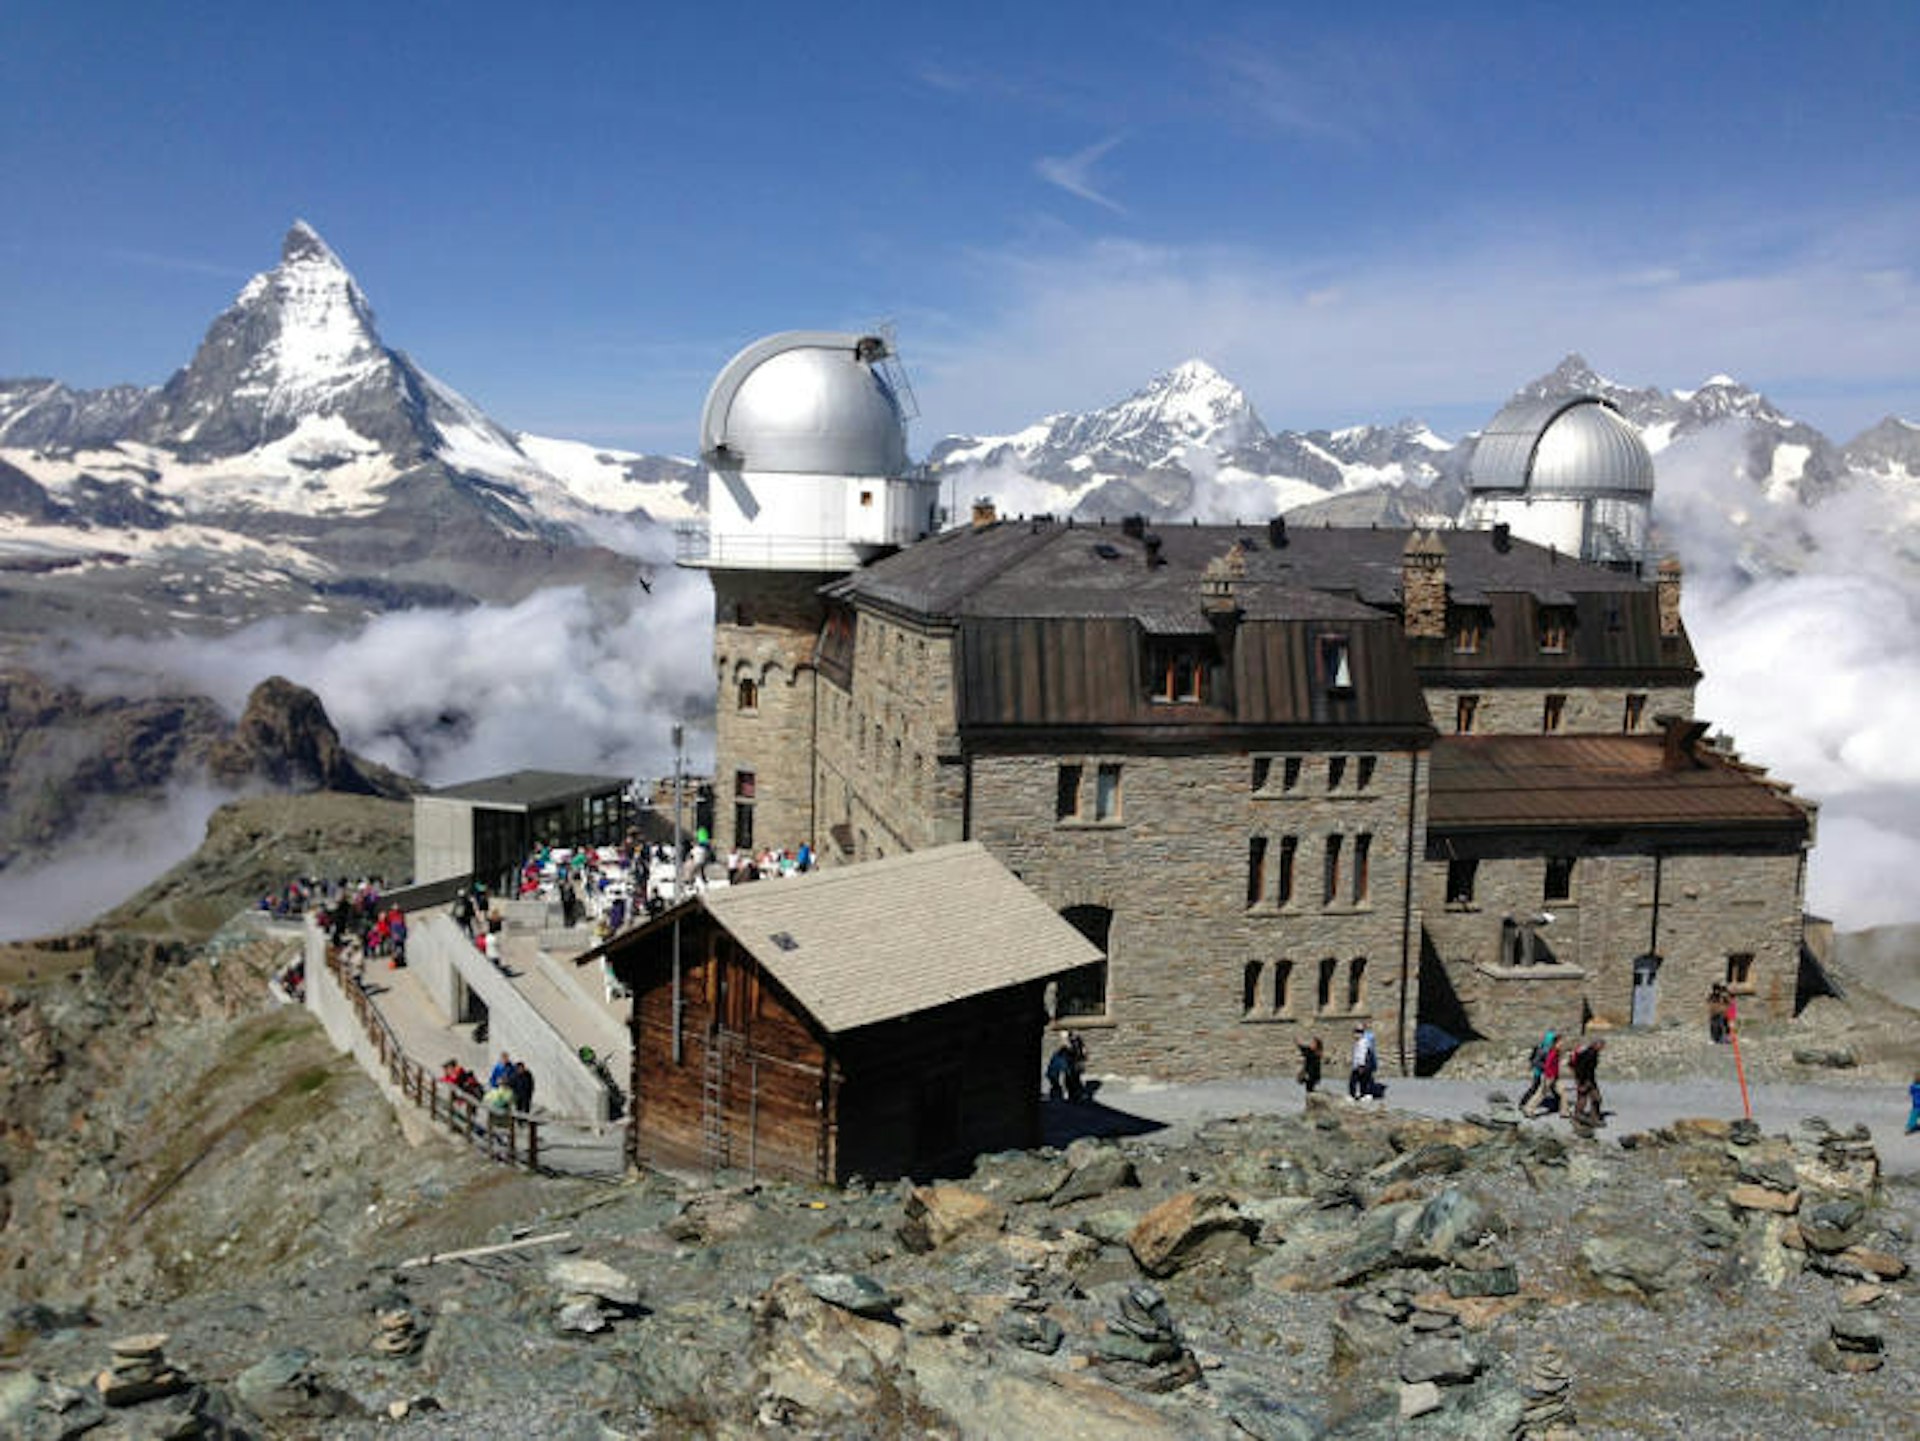 Switzerland’s highest hotel, Kulmhotel Gornergrat, at the top of the Gornergratbahn at 3100m. Image by Nicola Williams/Lonely Planet